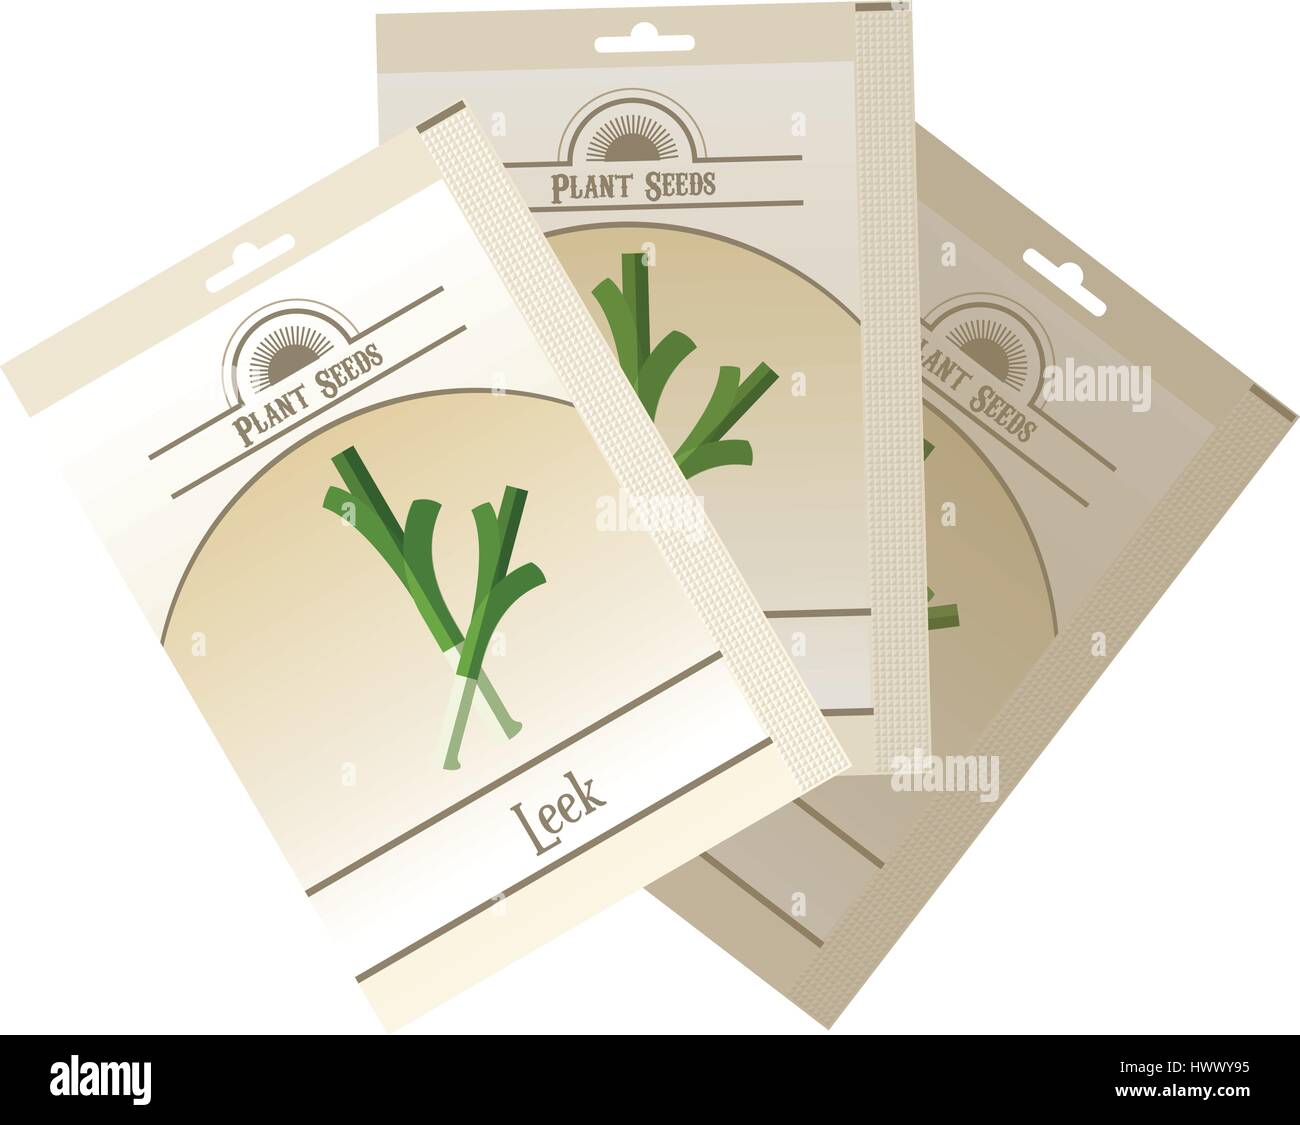 Pack of Leek seeds icon Stock Vector